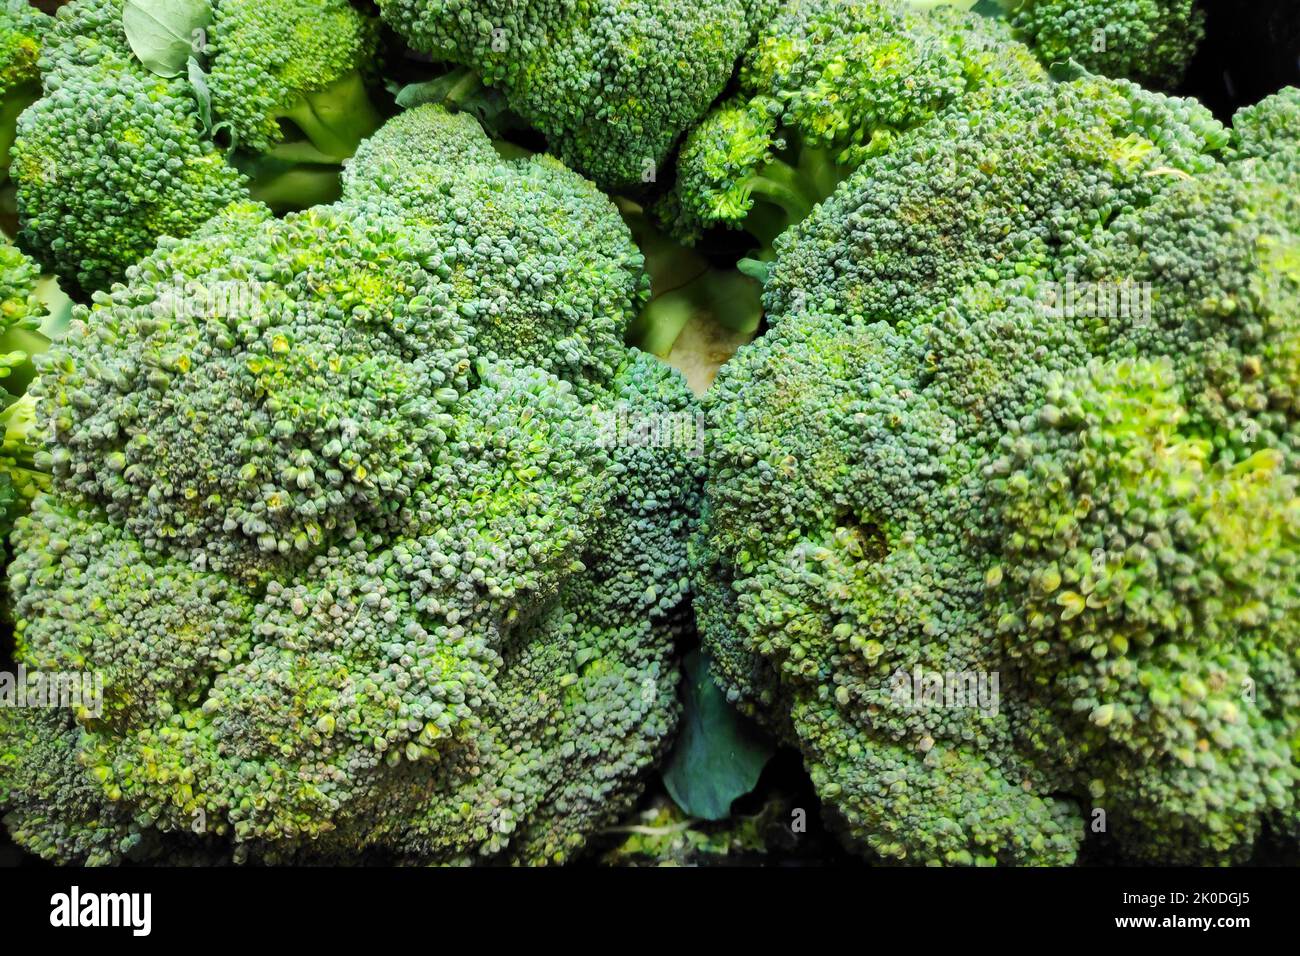 Full frame close-up on a stack of Broccoli on a market stall. Stock Photo